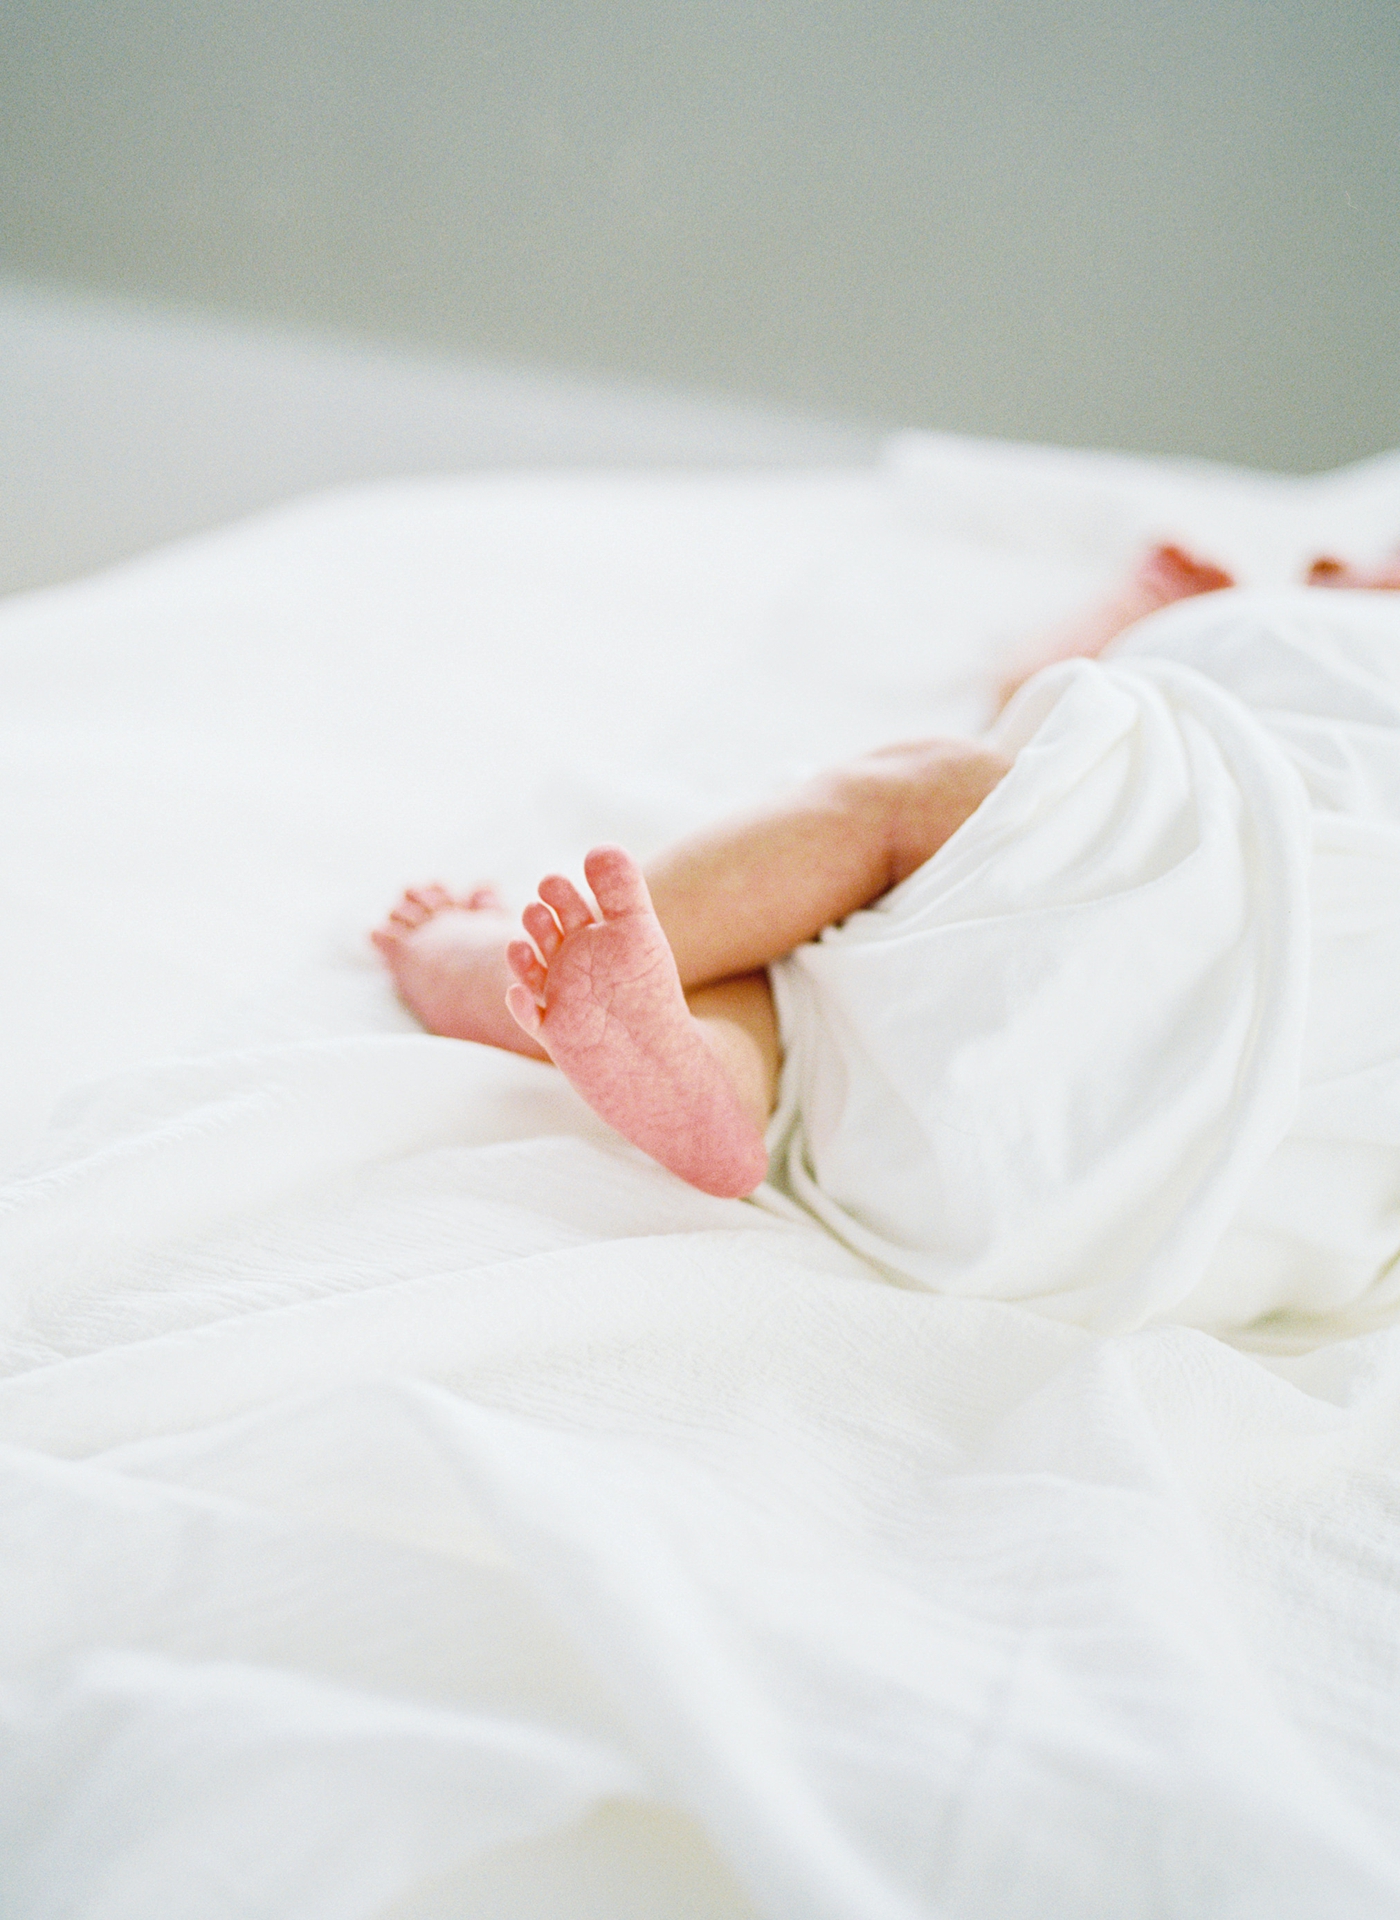 Film image of newborn feet from lifestyle session. Photo by Lauren Sosler Photography.